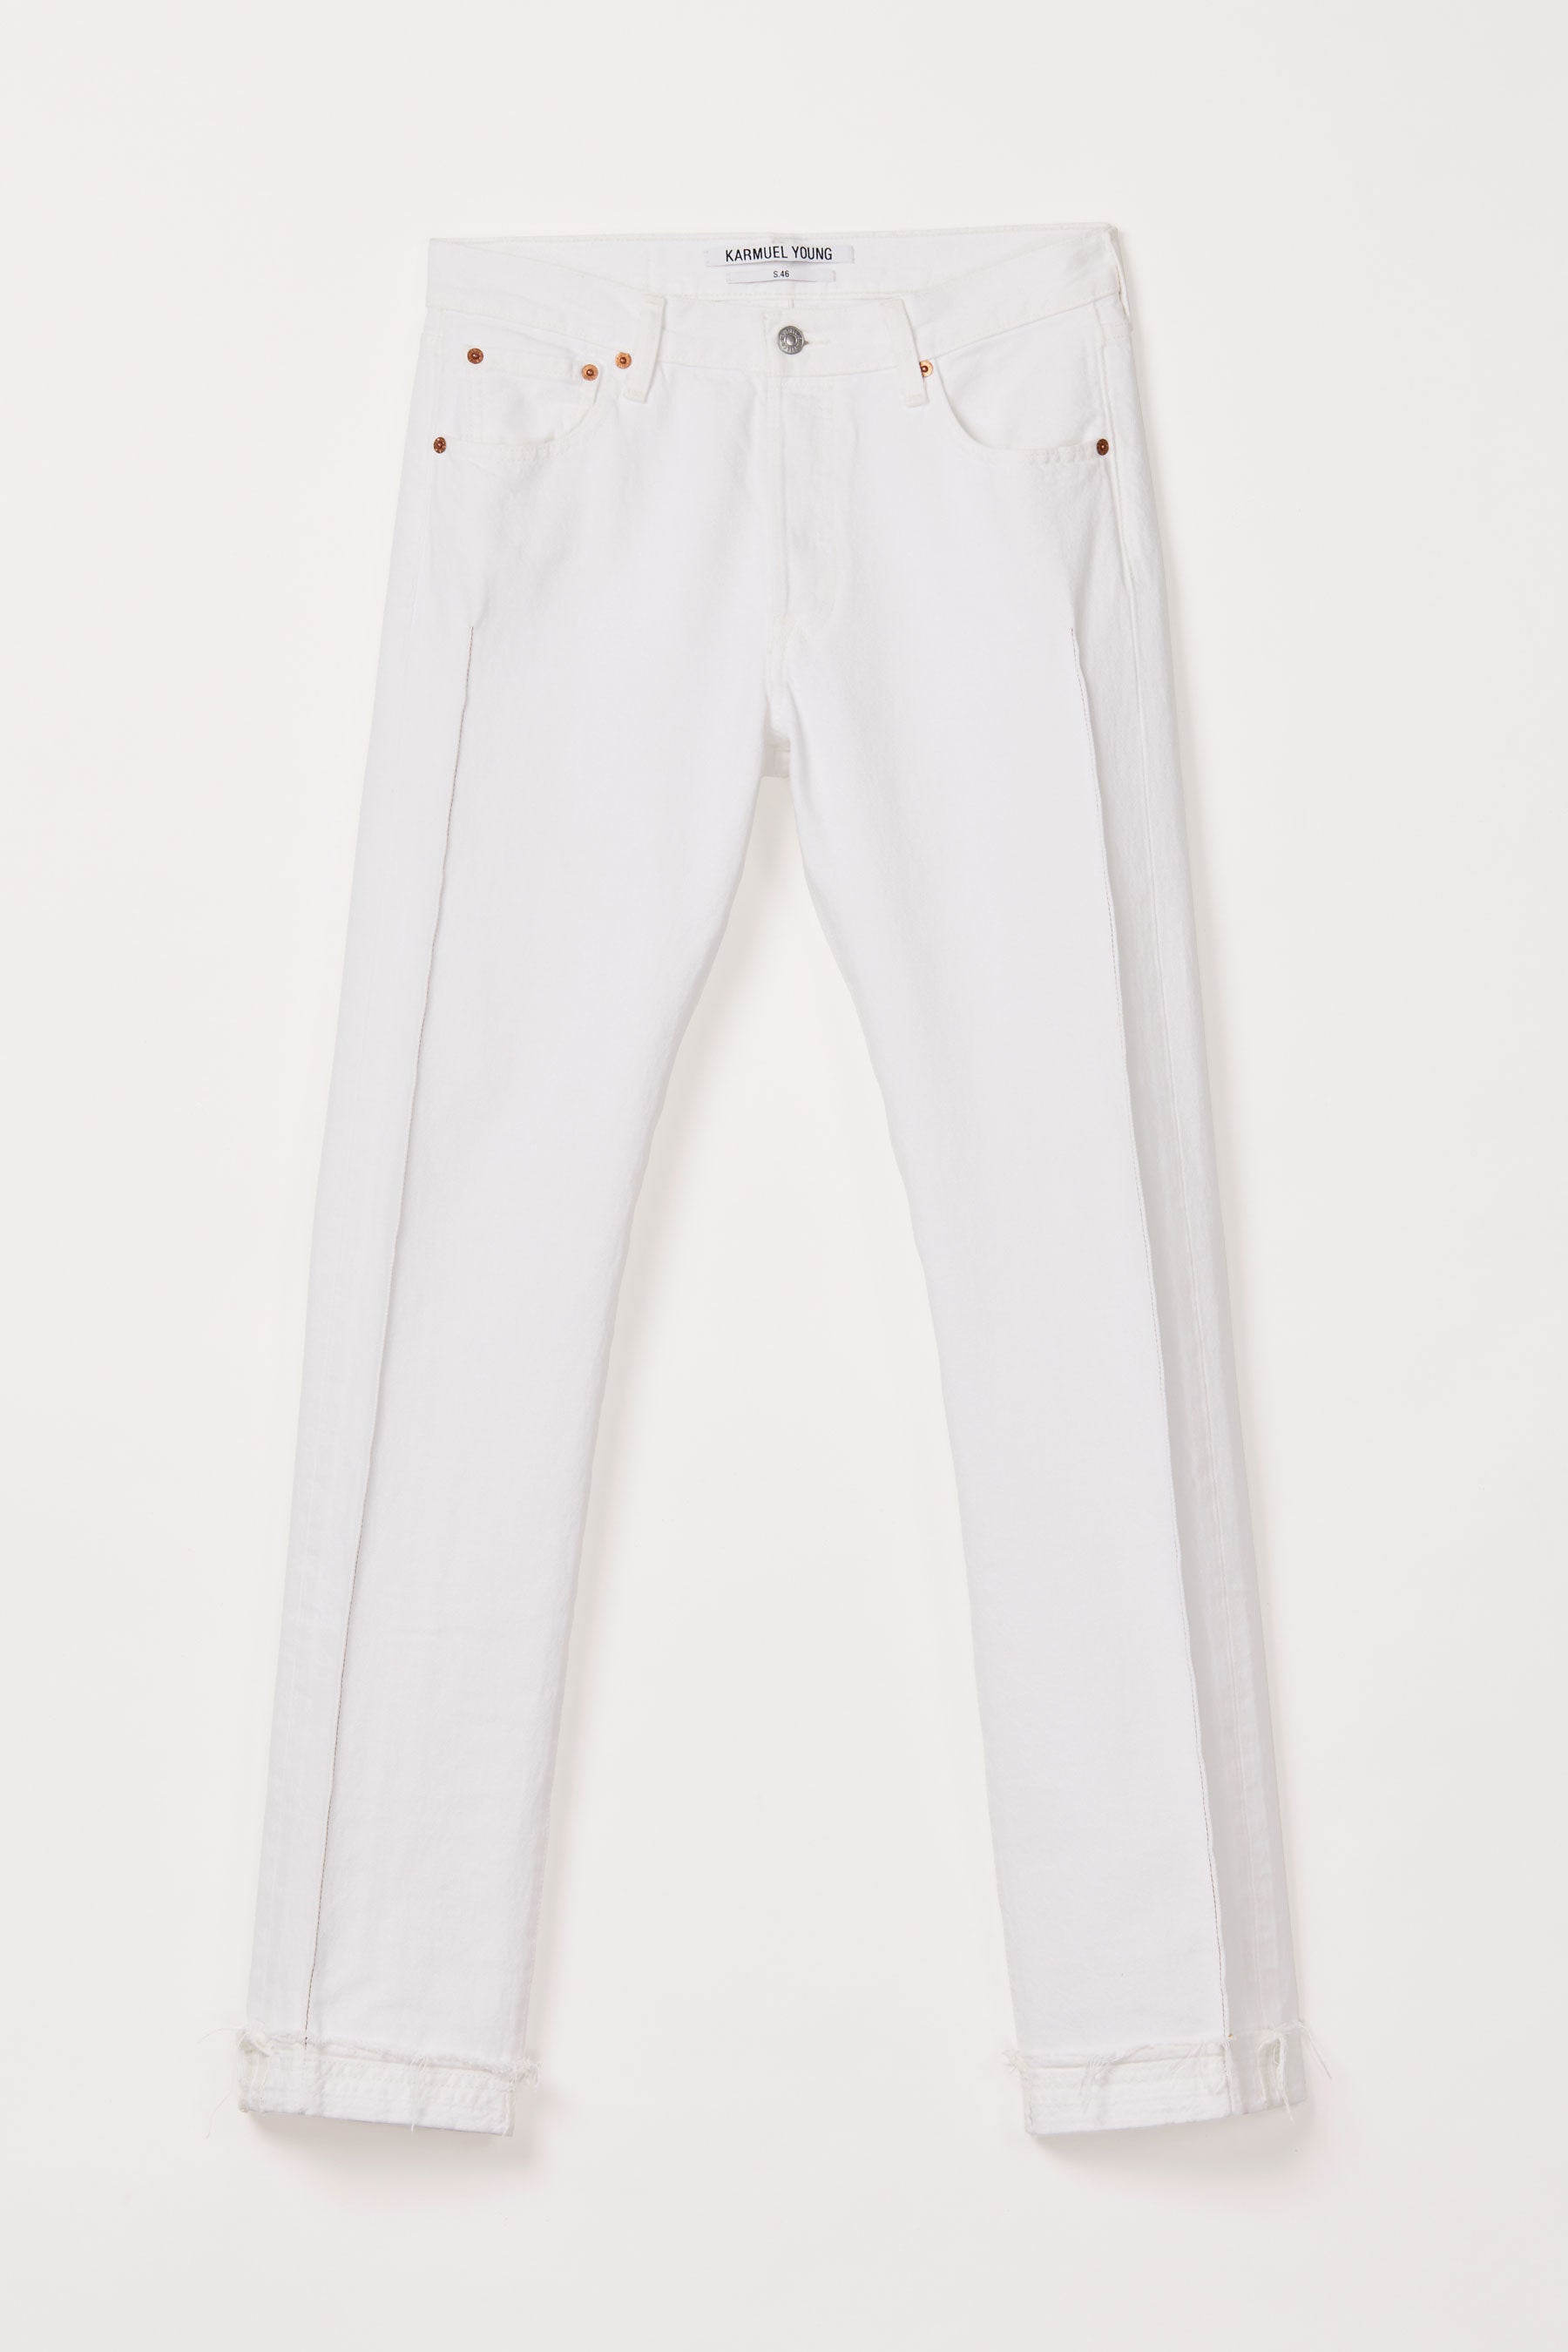 RE-edited White Distressed Cuffed Cuboid Levi's 501 Jeans